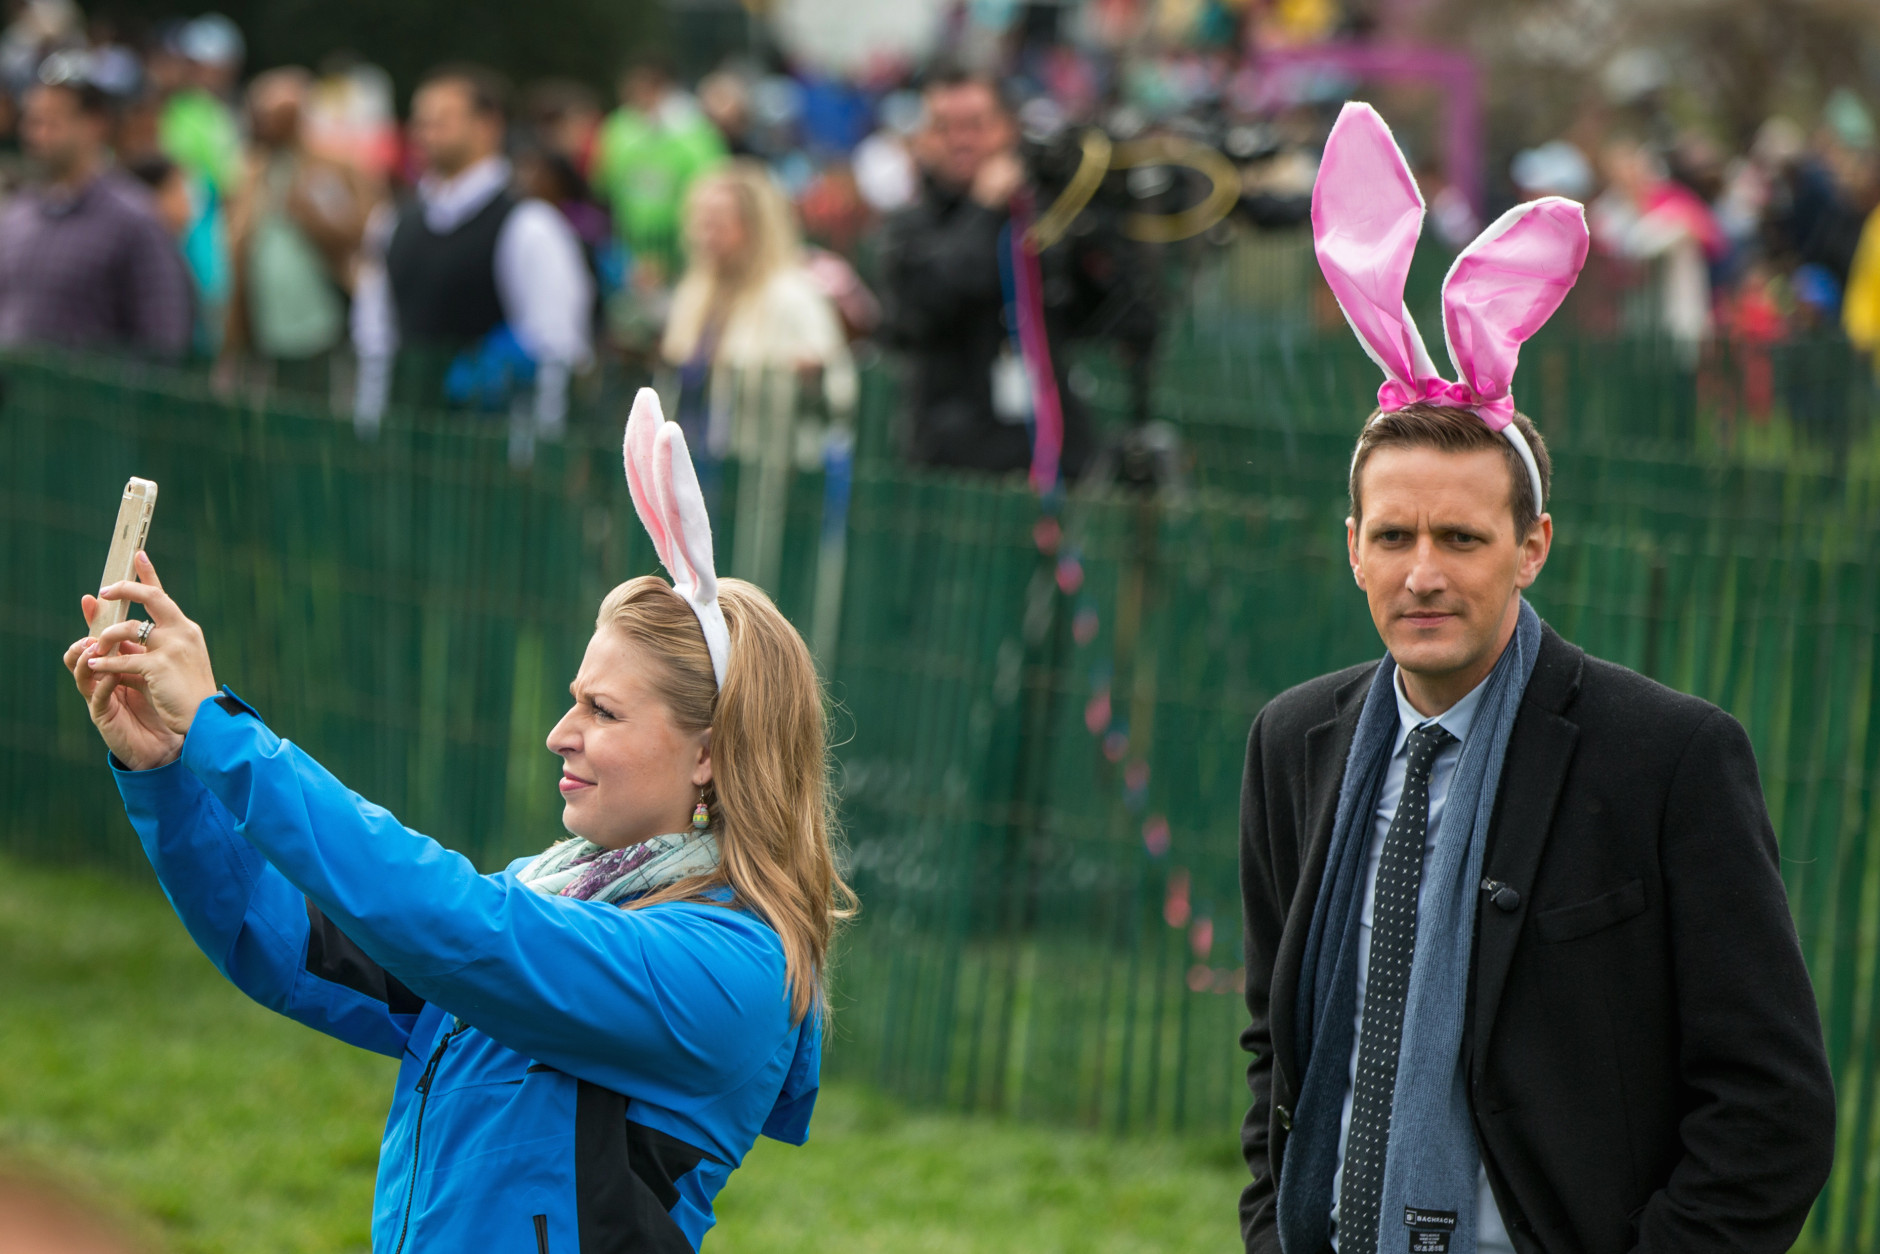 Two people wearing large bunny ears wait for President Barack Obama, first lady Michelle Obama and the Easter Bunny on the South Lawn of the White House in Washington, Monday, March 28, 2016, during the White House Easter Egg Roll. Thousands of children gathered at the White House for the annual Easter Egg Roll. This year's event features  live music, sports courts, cooking stations, storytelling, and Easter egg rolling. (AP Photo/Andrew Harnik)